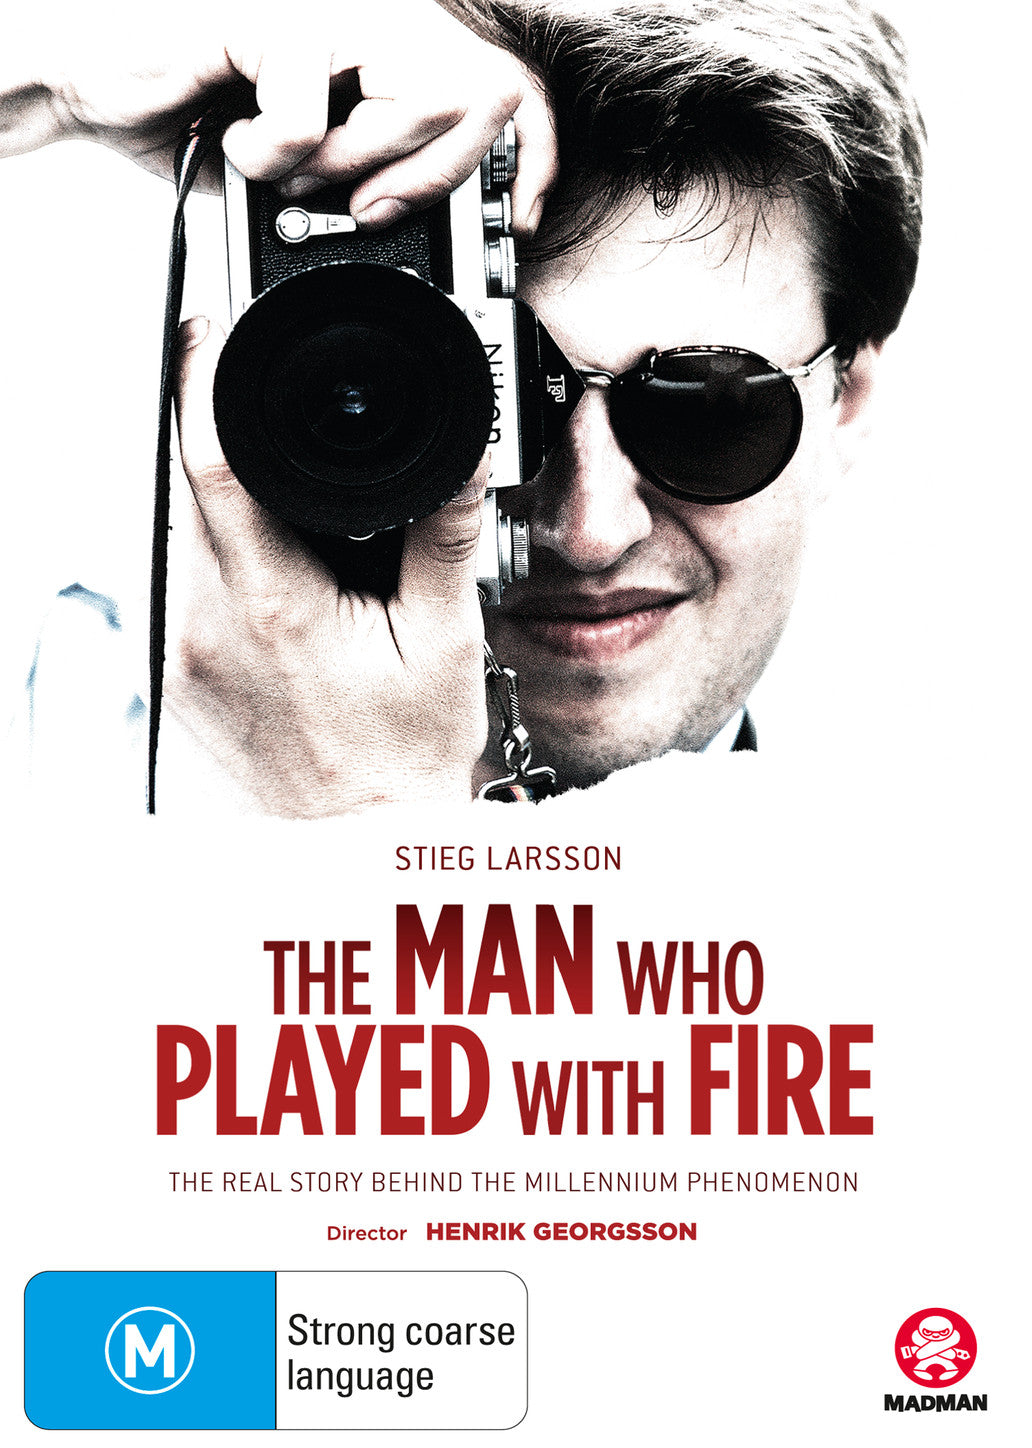 STIEG LARSSON: THE MAN WHO PLAYED WITH FIRE